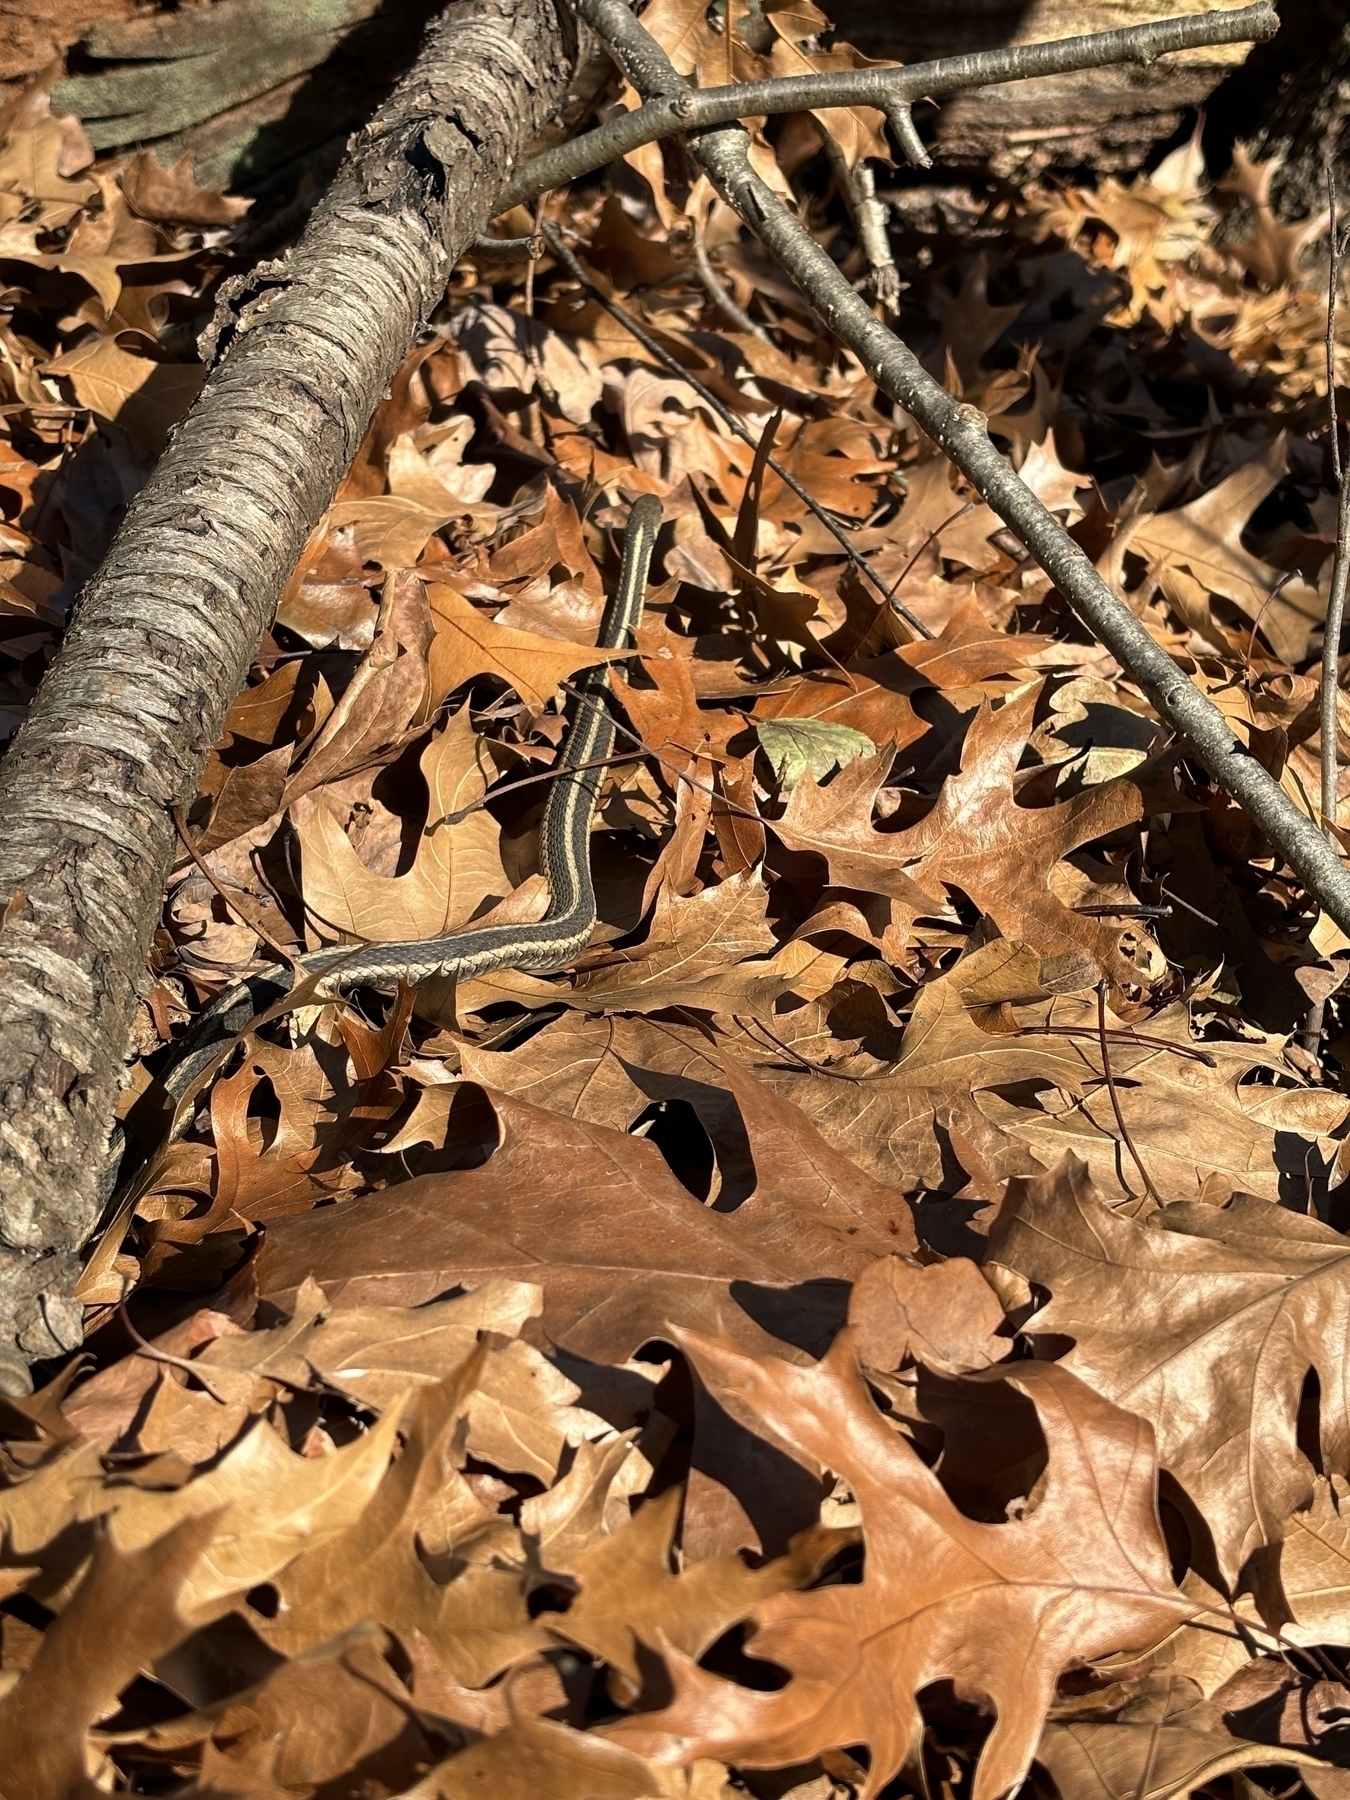 Garter snake nearly disguised in autumn foliage